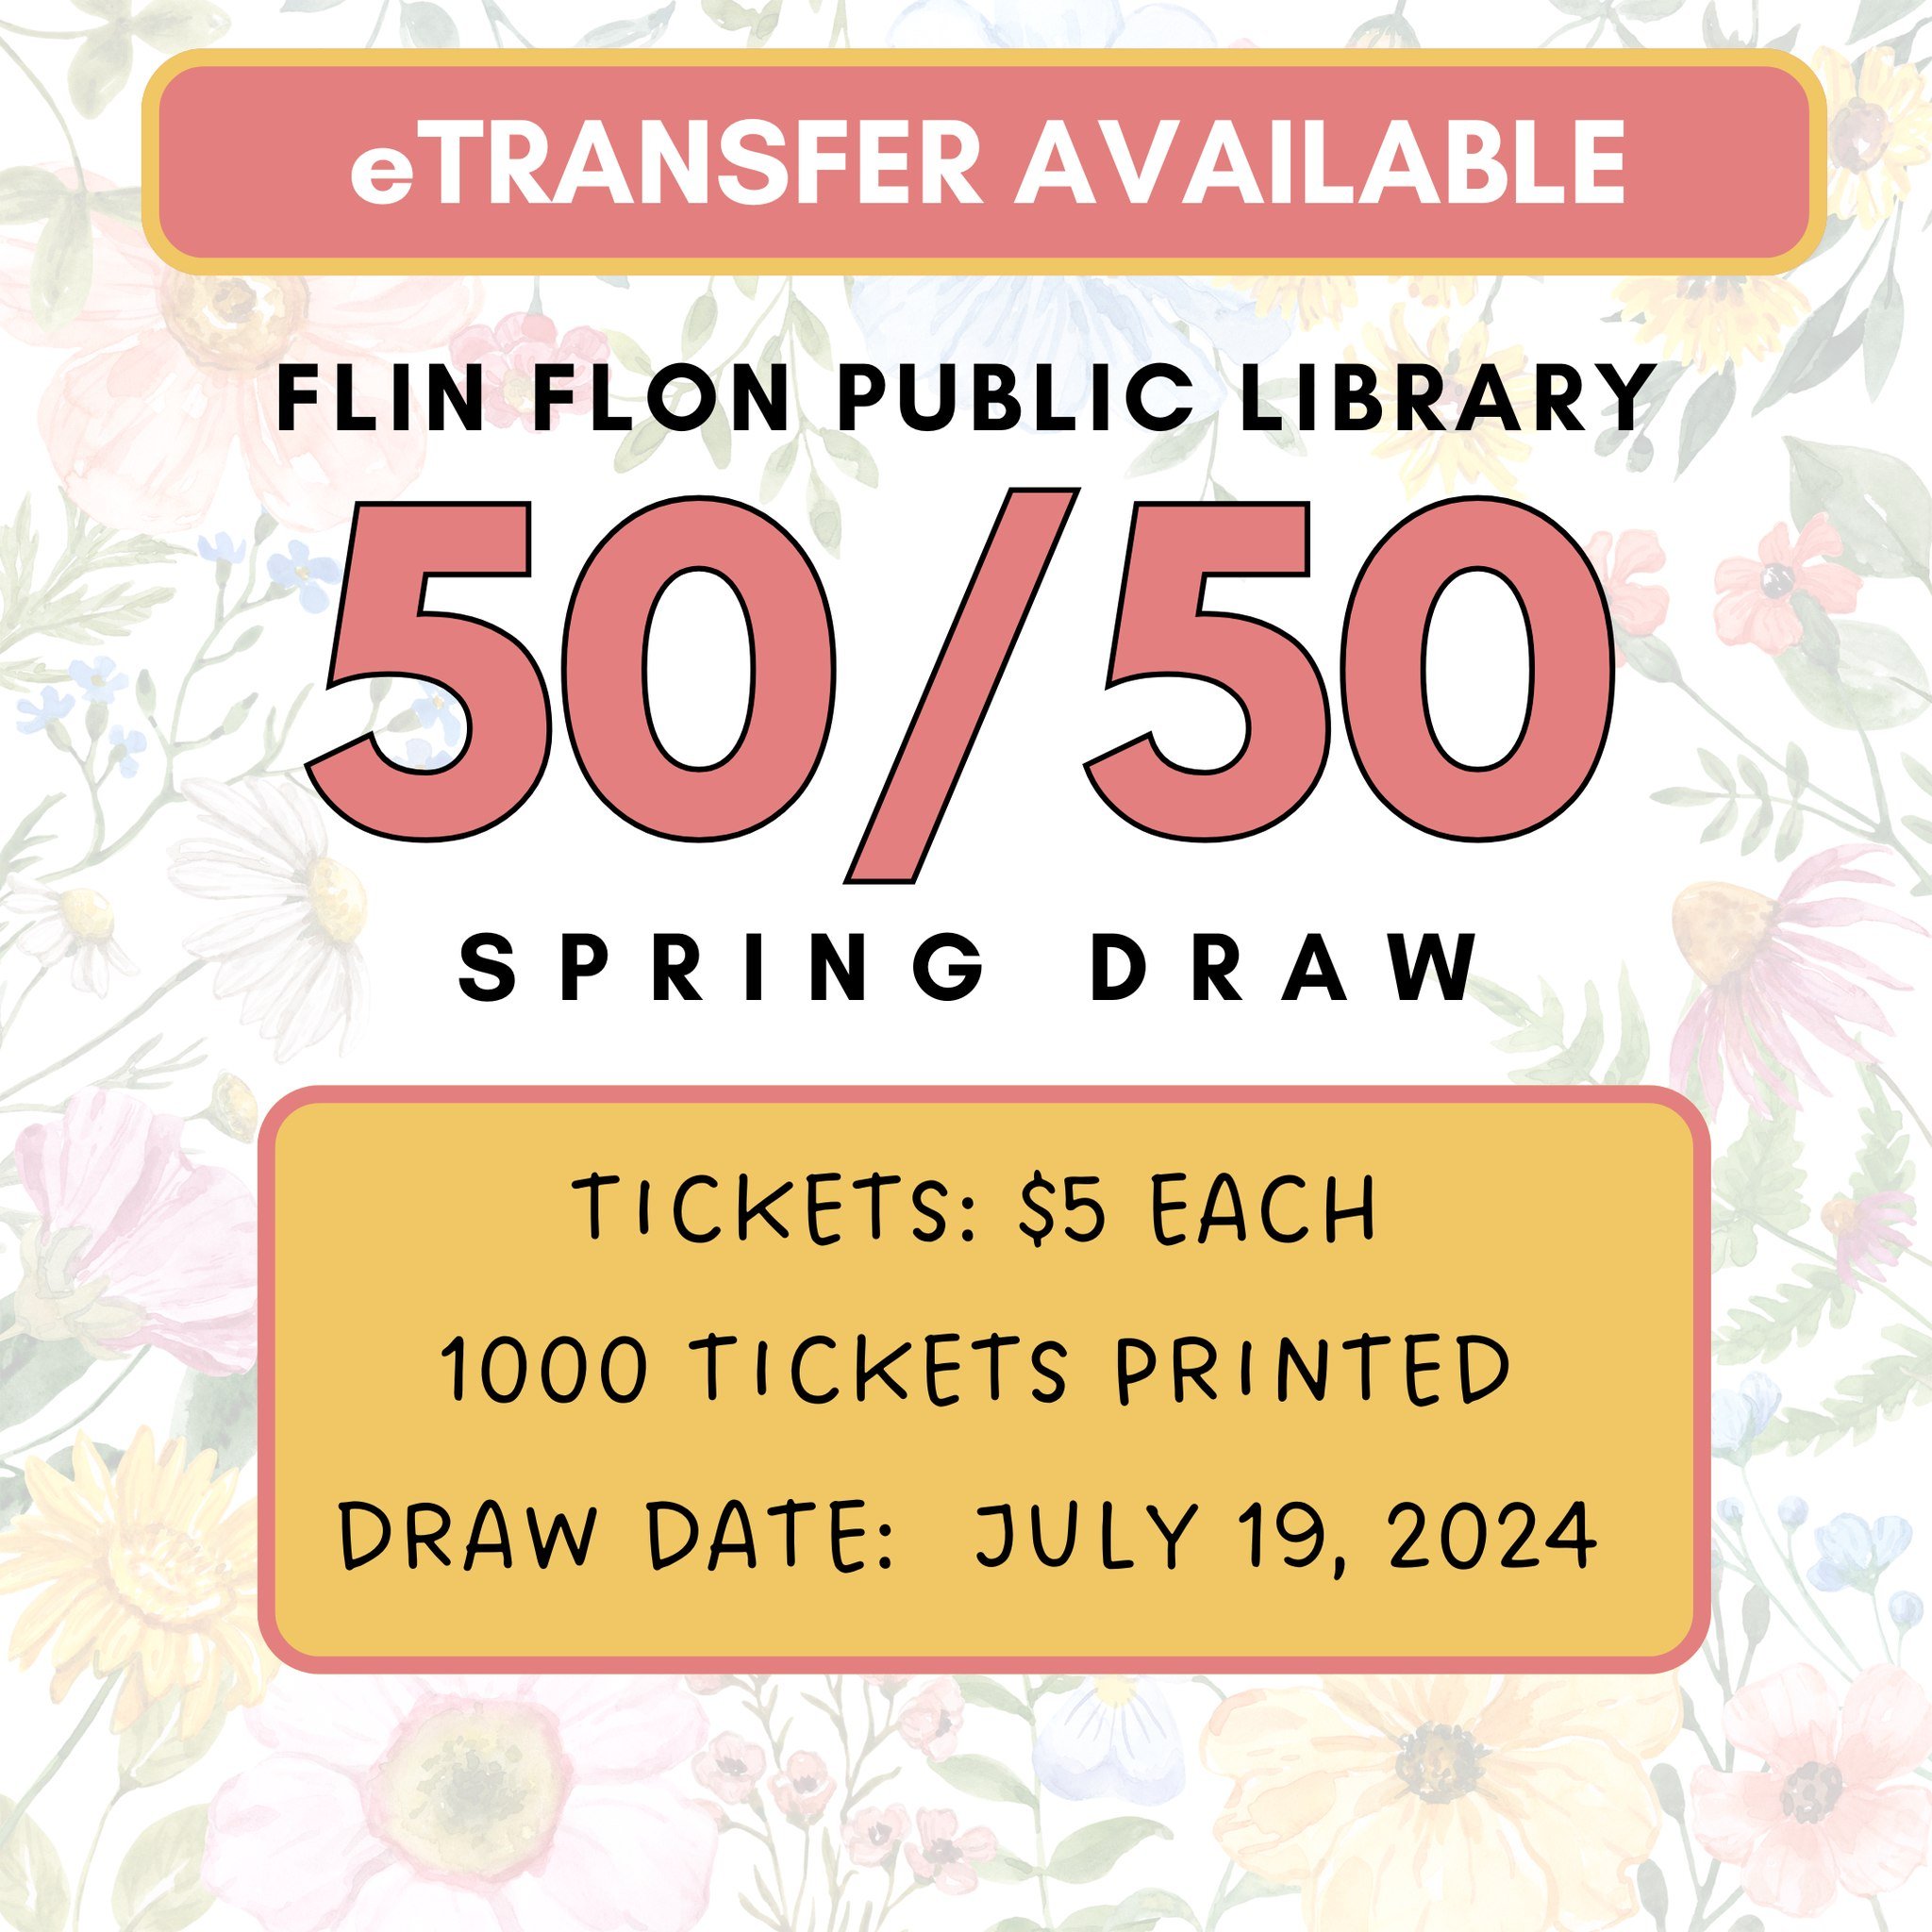 FLIN FLON PUBLIC LIBRARY SPRING 50/50 DRAW. Tickets will be sold until noon (12:00 PM) on July 18, 2024. The draw date is July 19, 2024 at noon (4:00 PM).
Tickets are $5 each, with 1000 tickets printed.

PURCHASE VIA ETRANSFER:
1) Send the eTransfer 